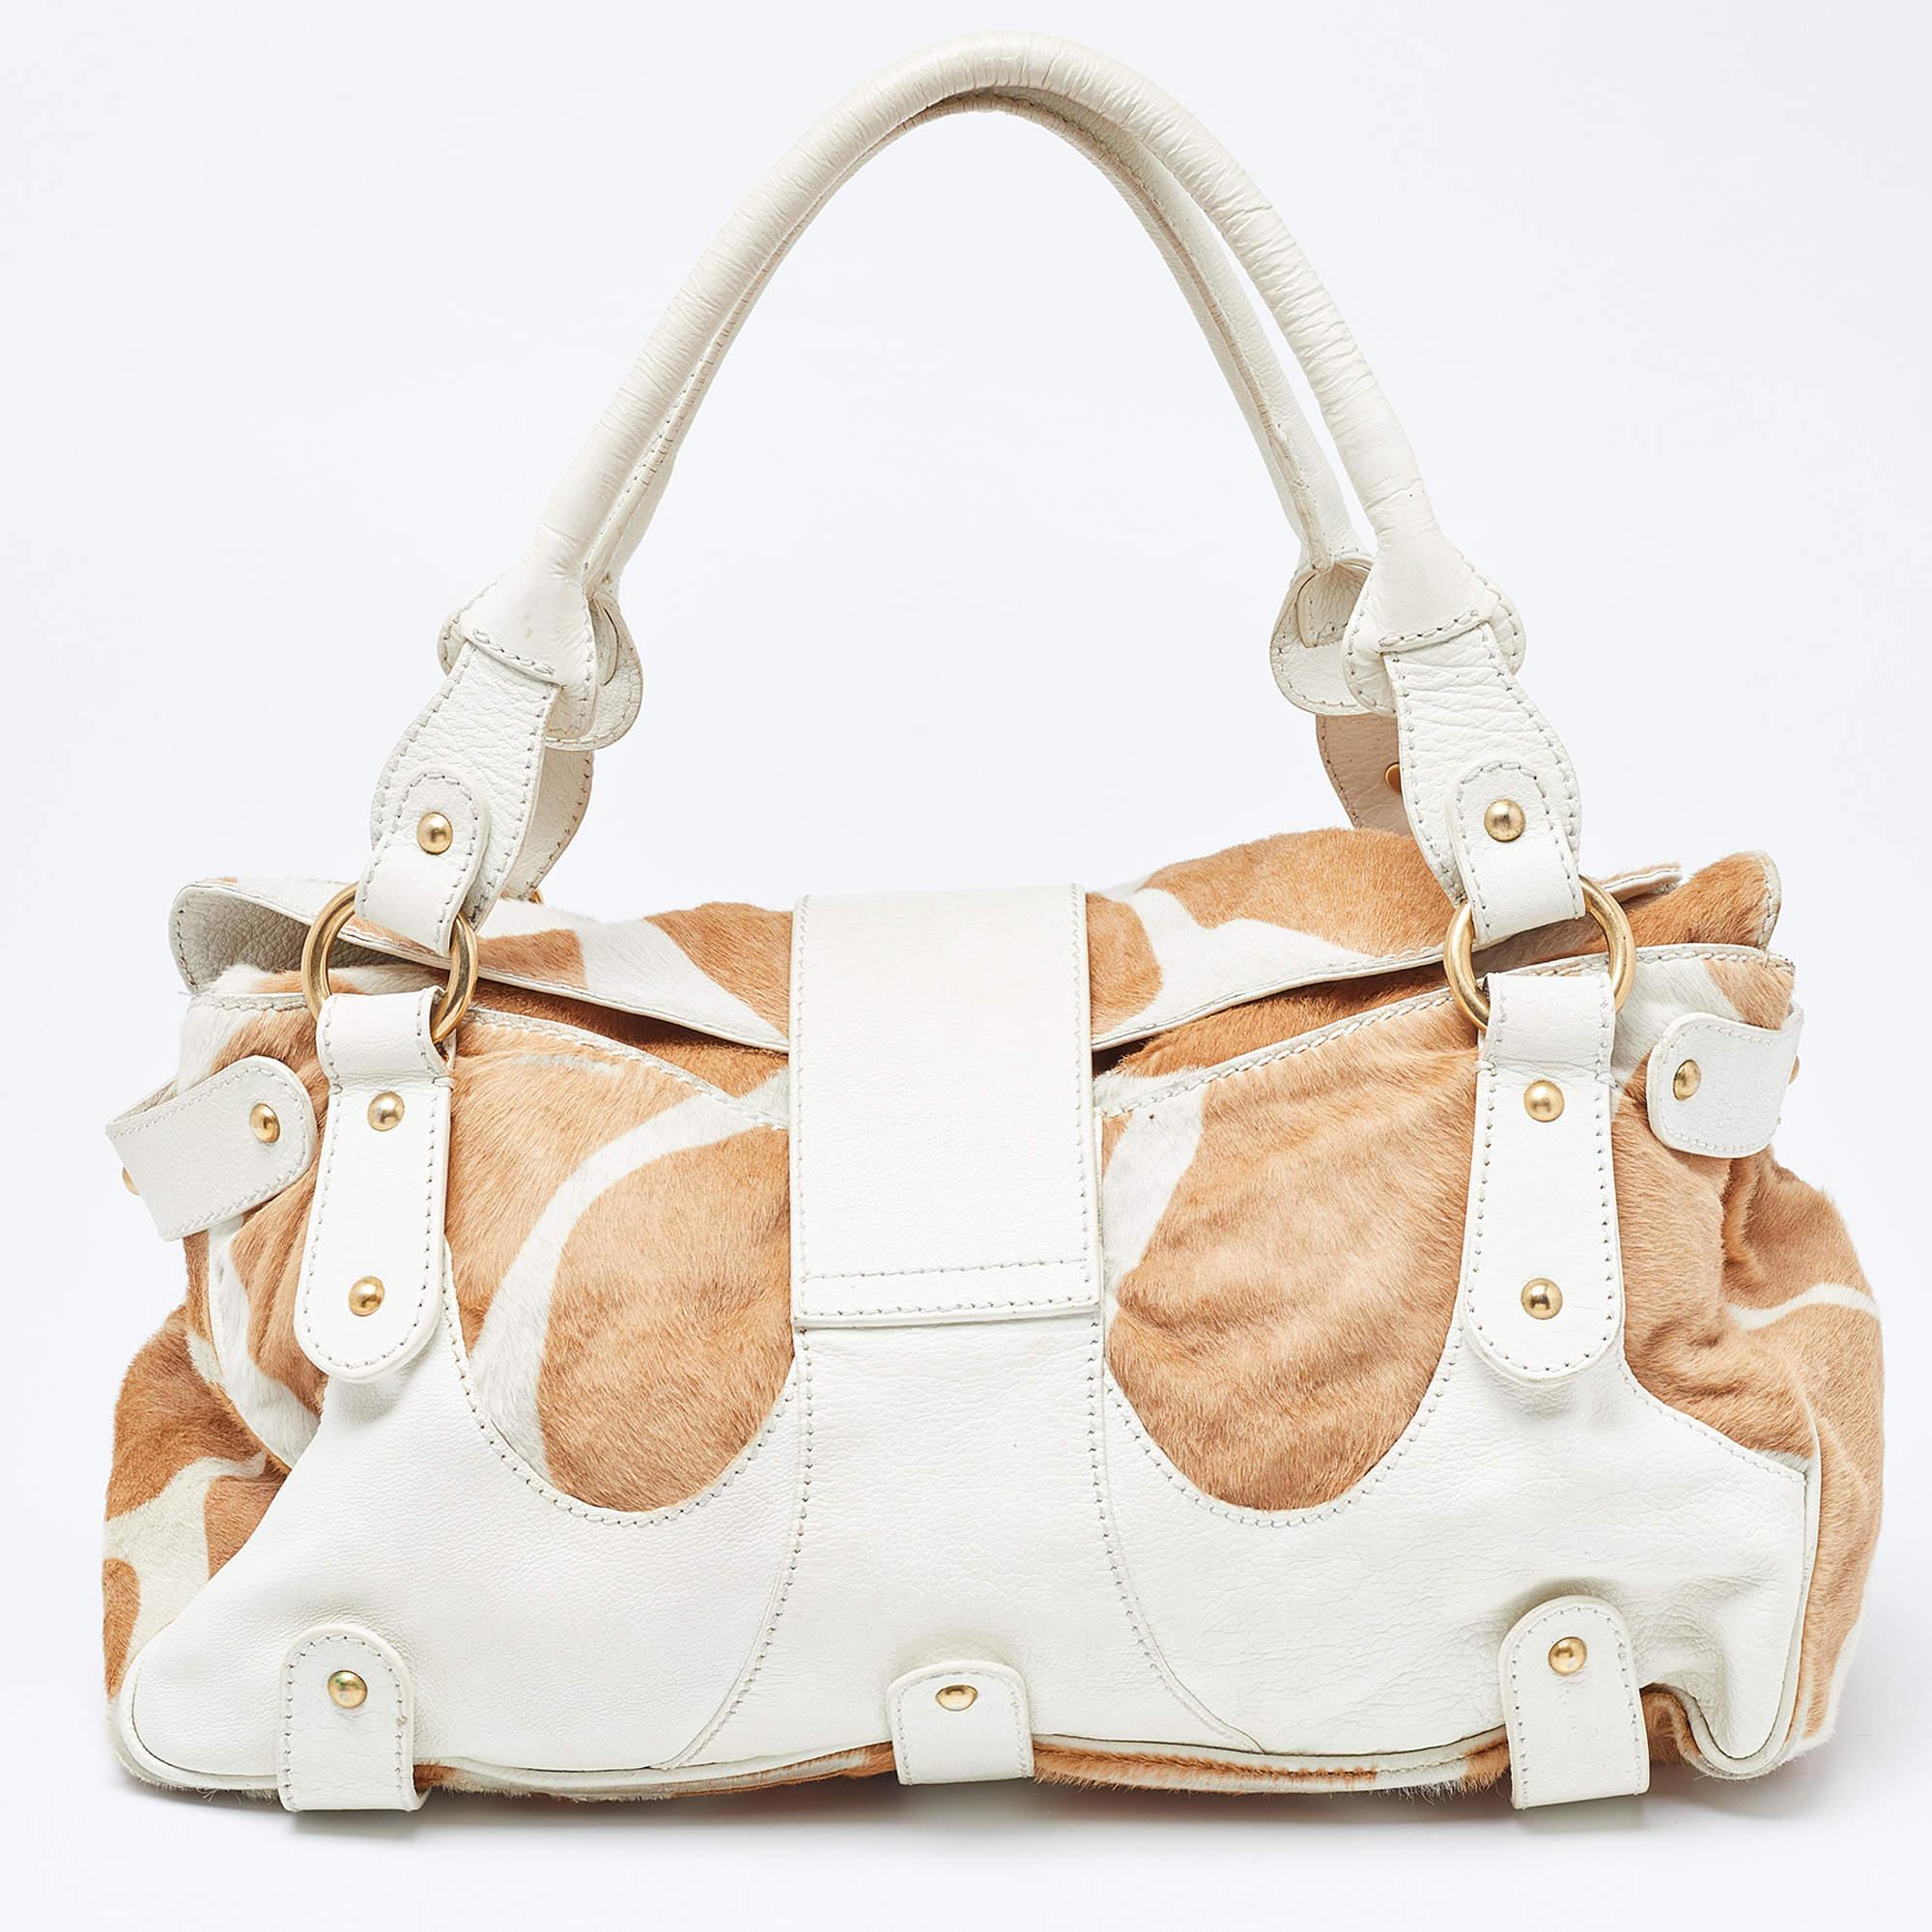 Valentino Beige/White Calfhair and Leather VLogo Satchel 7